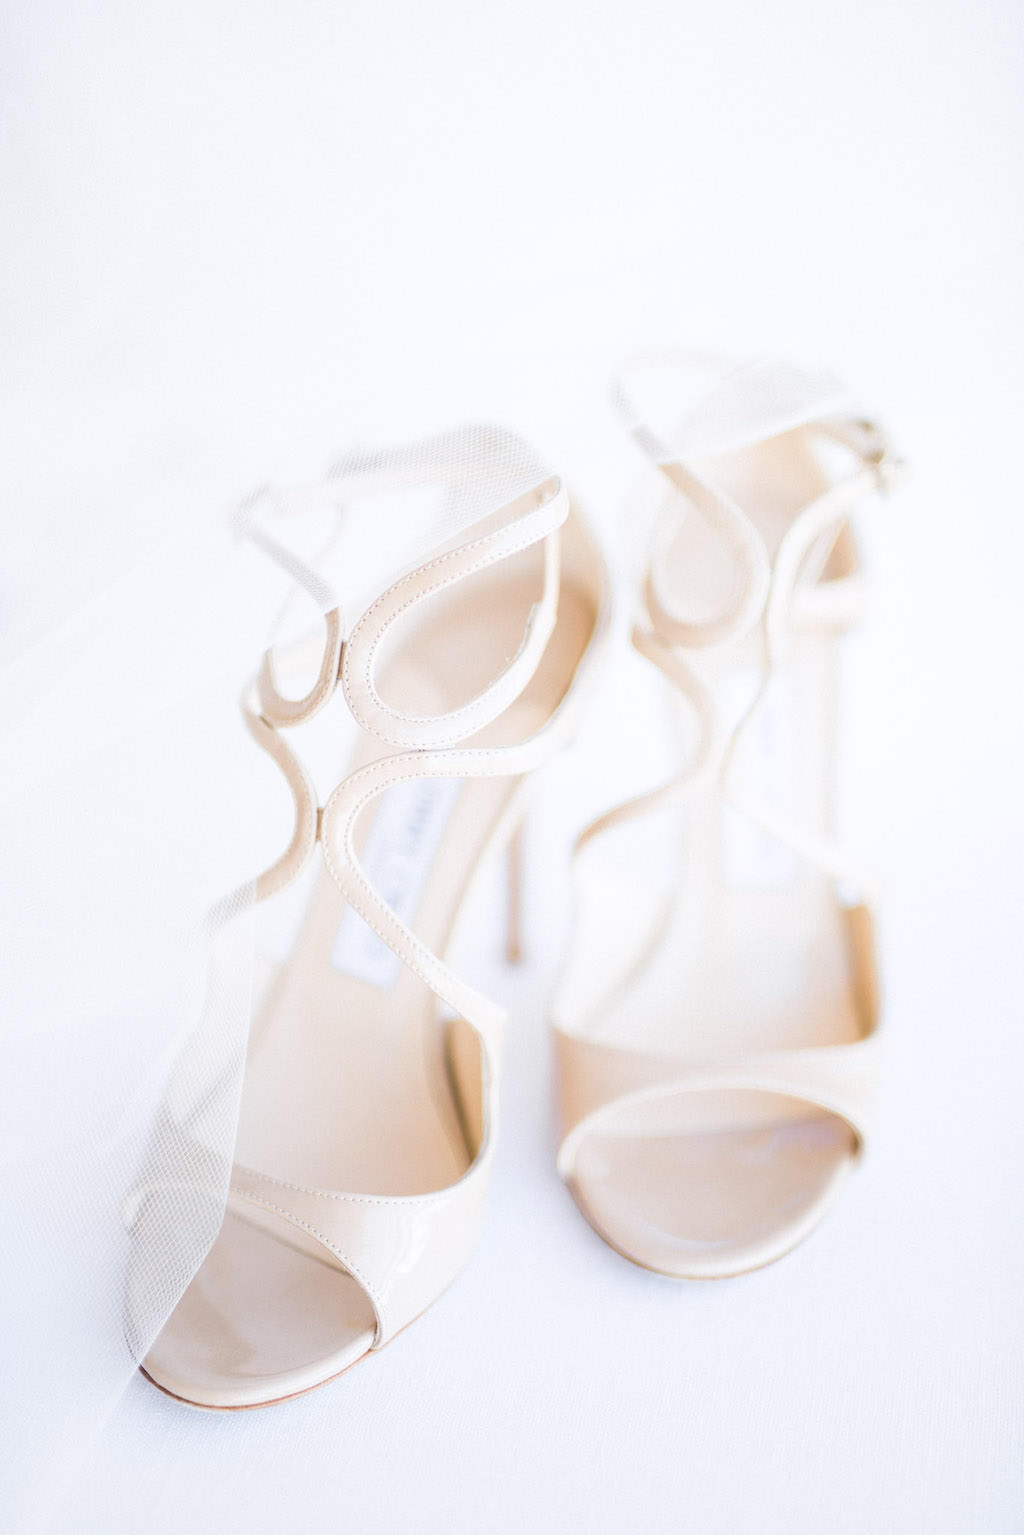 Off-White Ivory Strappy Open Toe Wedding Shoes